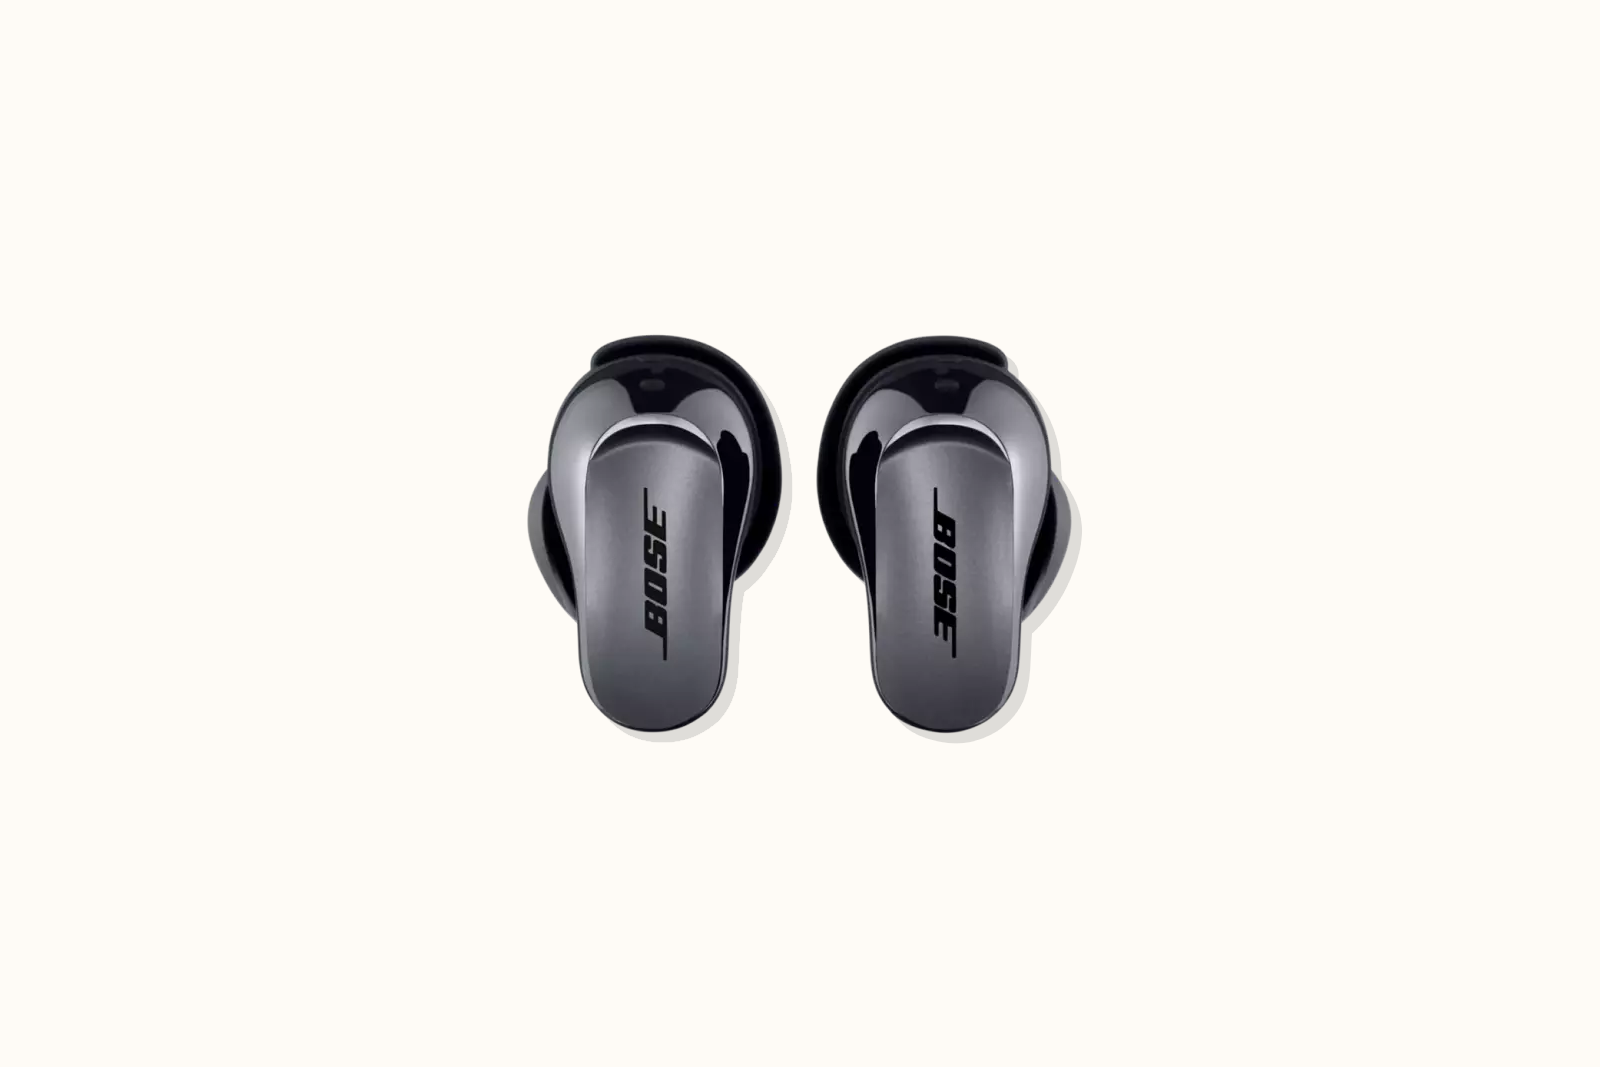 Bose QuietComfort Ultra Earbuds Review: Taking back the ANC crown